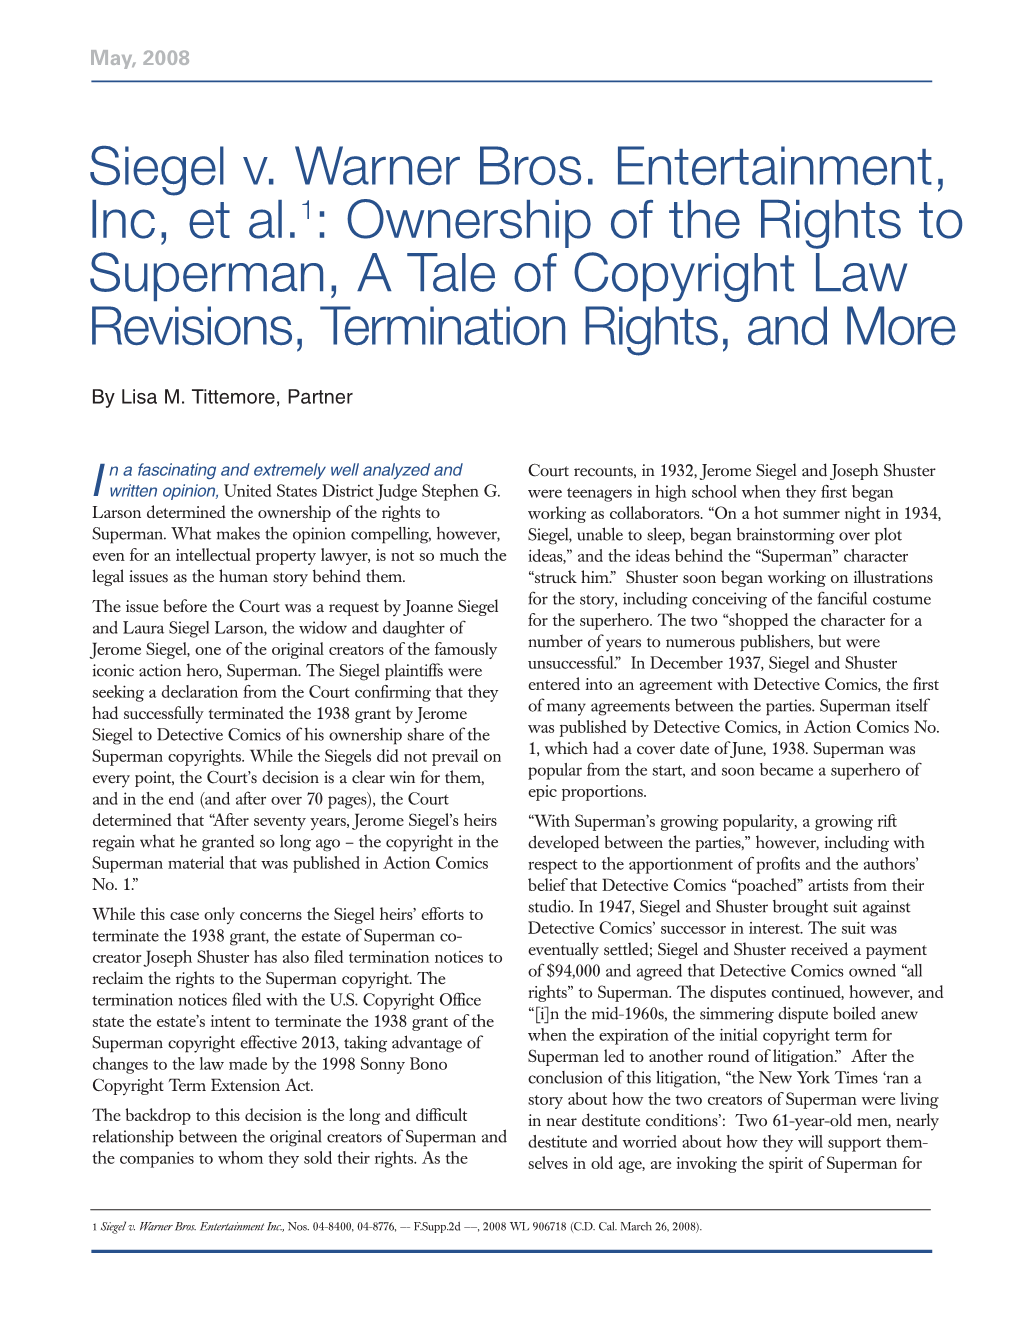 Siegel V. Warner Bros. Entertainment, Inc, Et Al.1: Ownership of the Rights to Superman, a Tale of Copyright Law Revisions, Termination Rights, and More